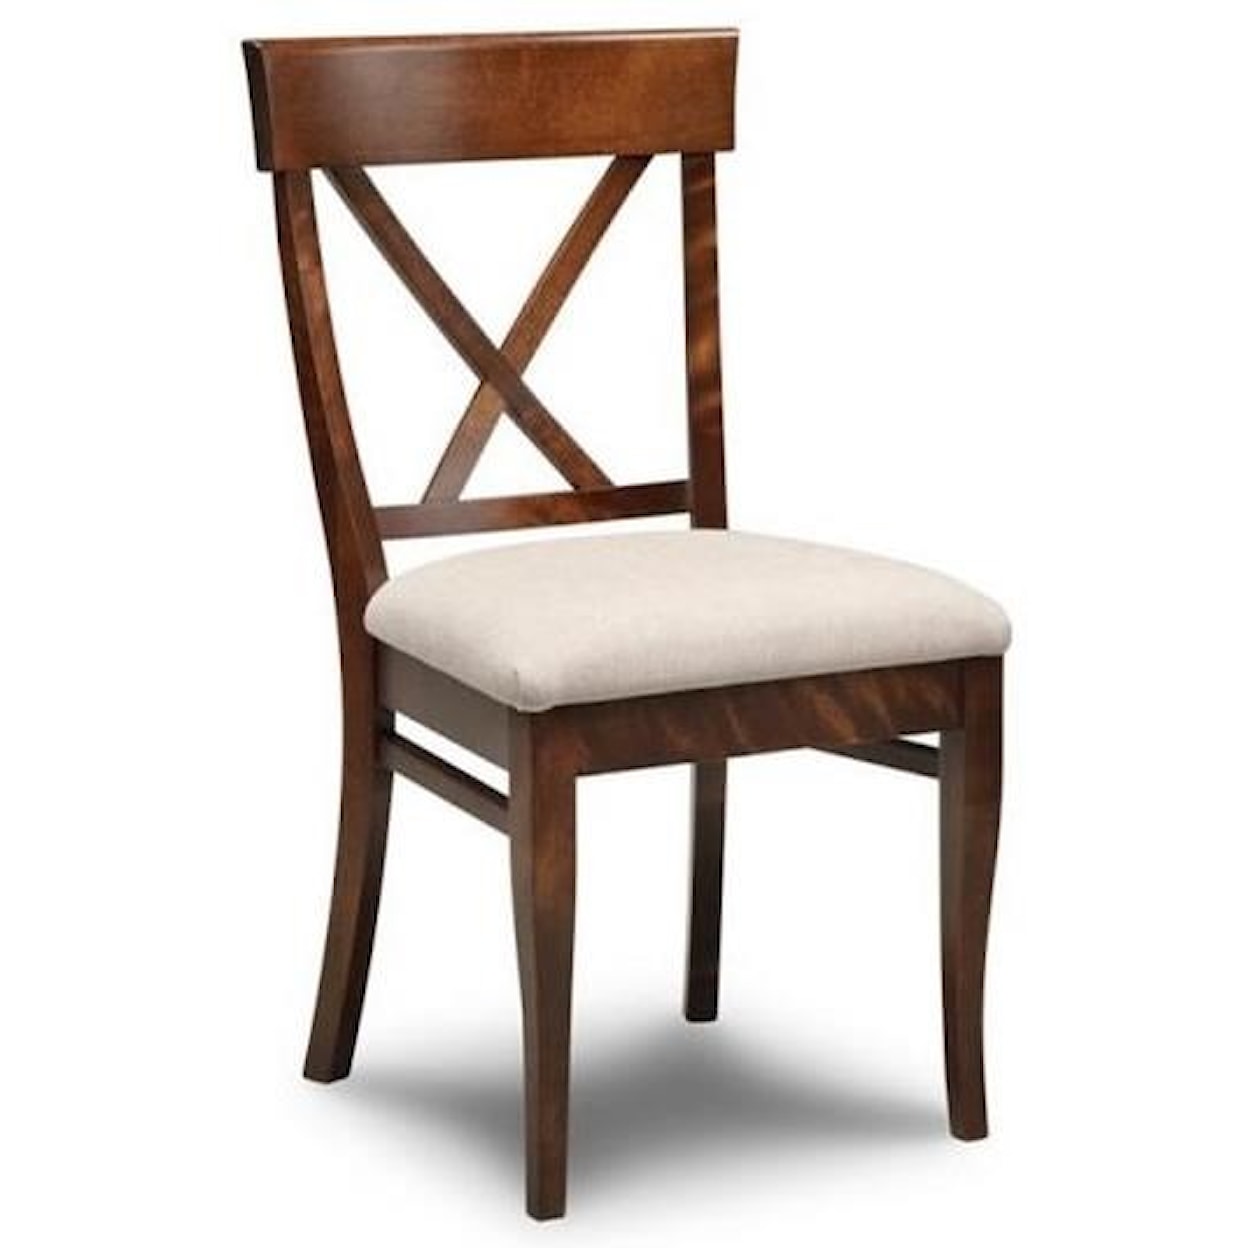 Handstone Florence X Back Side Chair